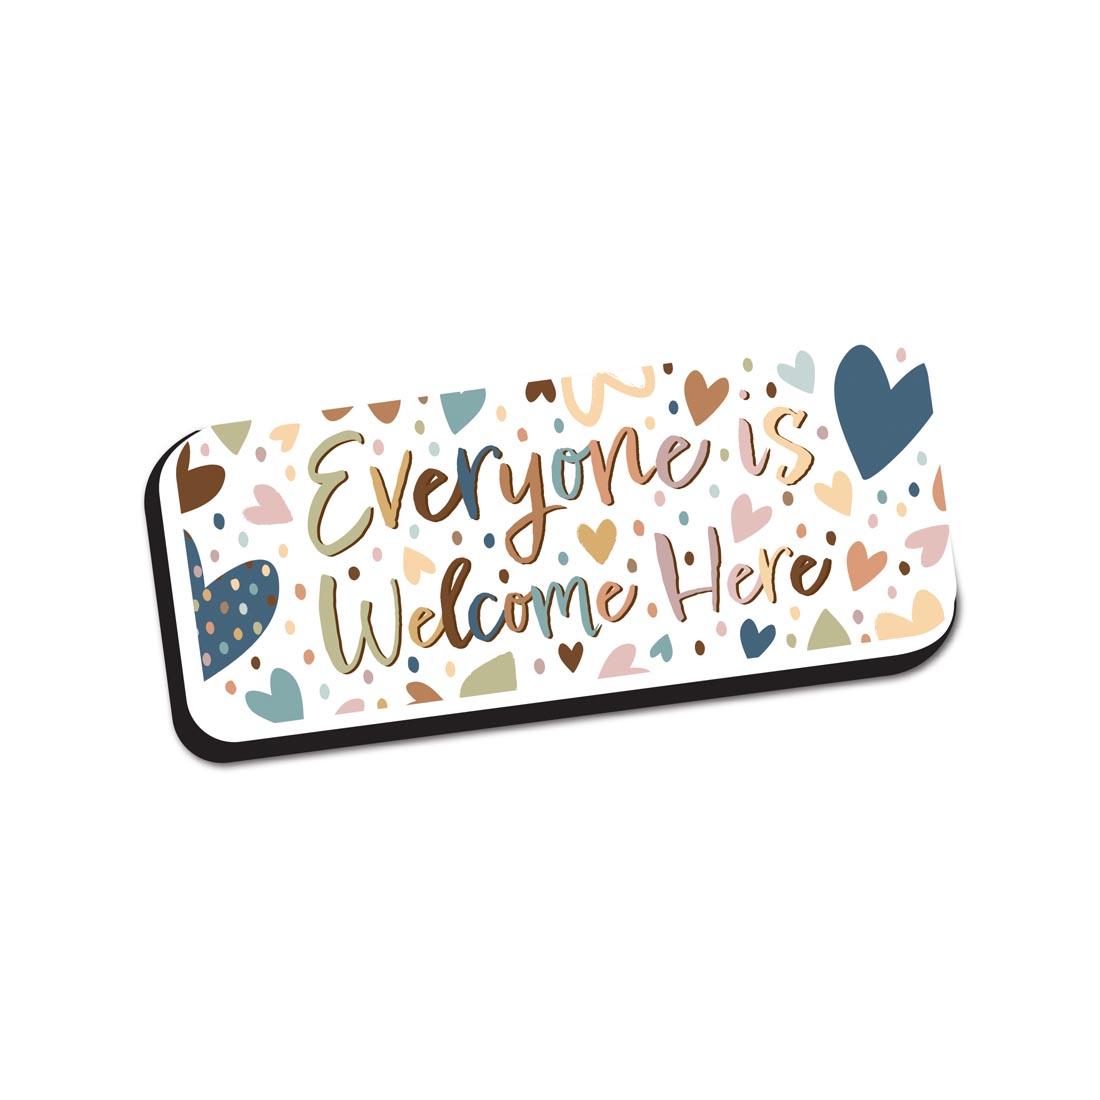 Everyone Is Welcome Here Magnetic Whiteboard Eraser by Ashley